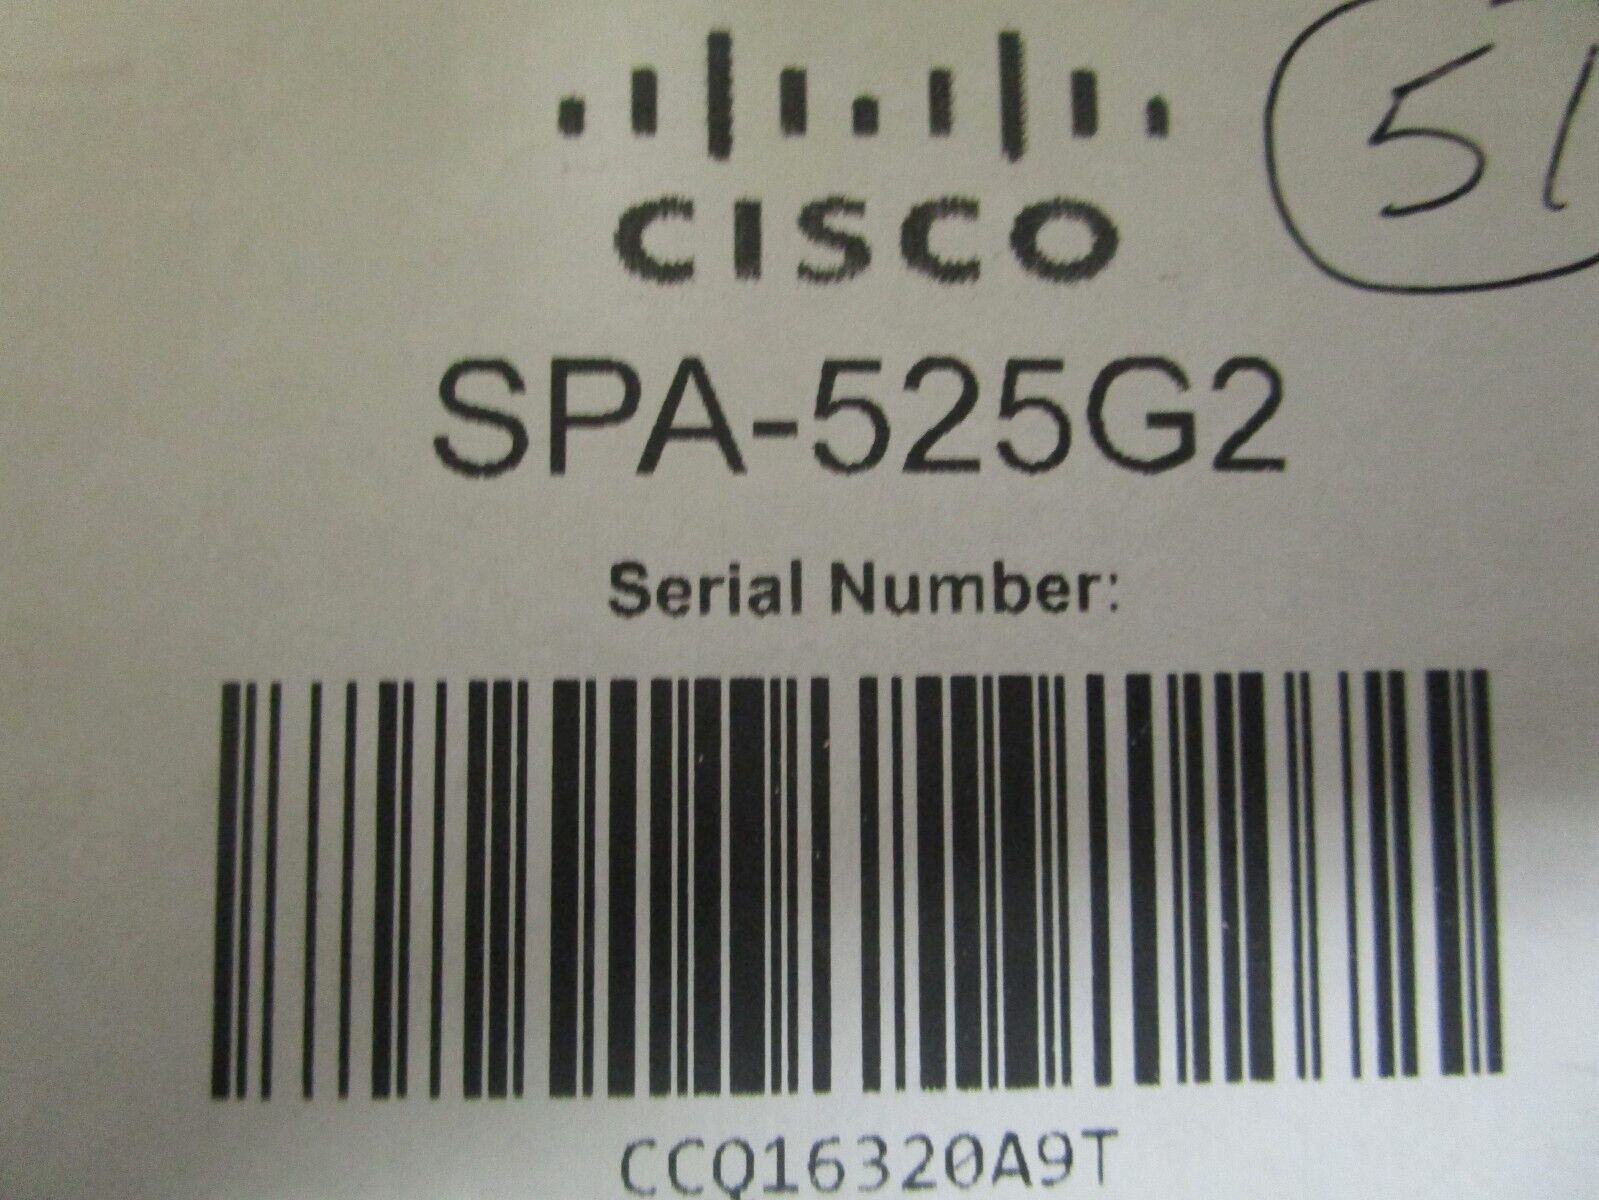 Cisco SPA525G2 5 Line IP VOIP POE Color Display Telephone -spa-525G2 - NEW